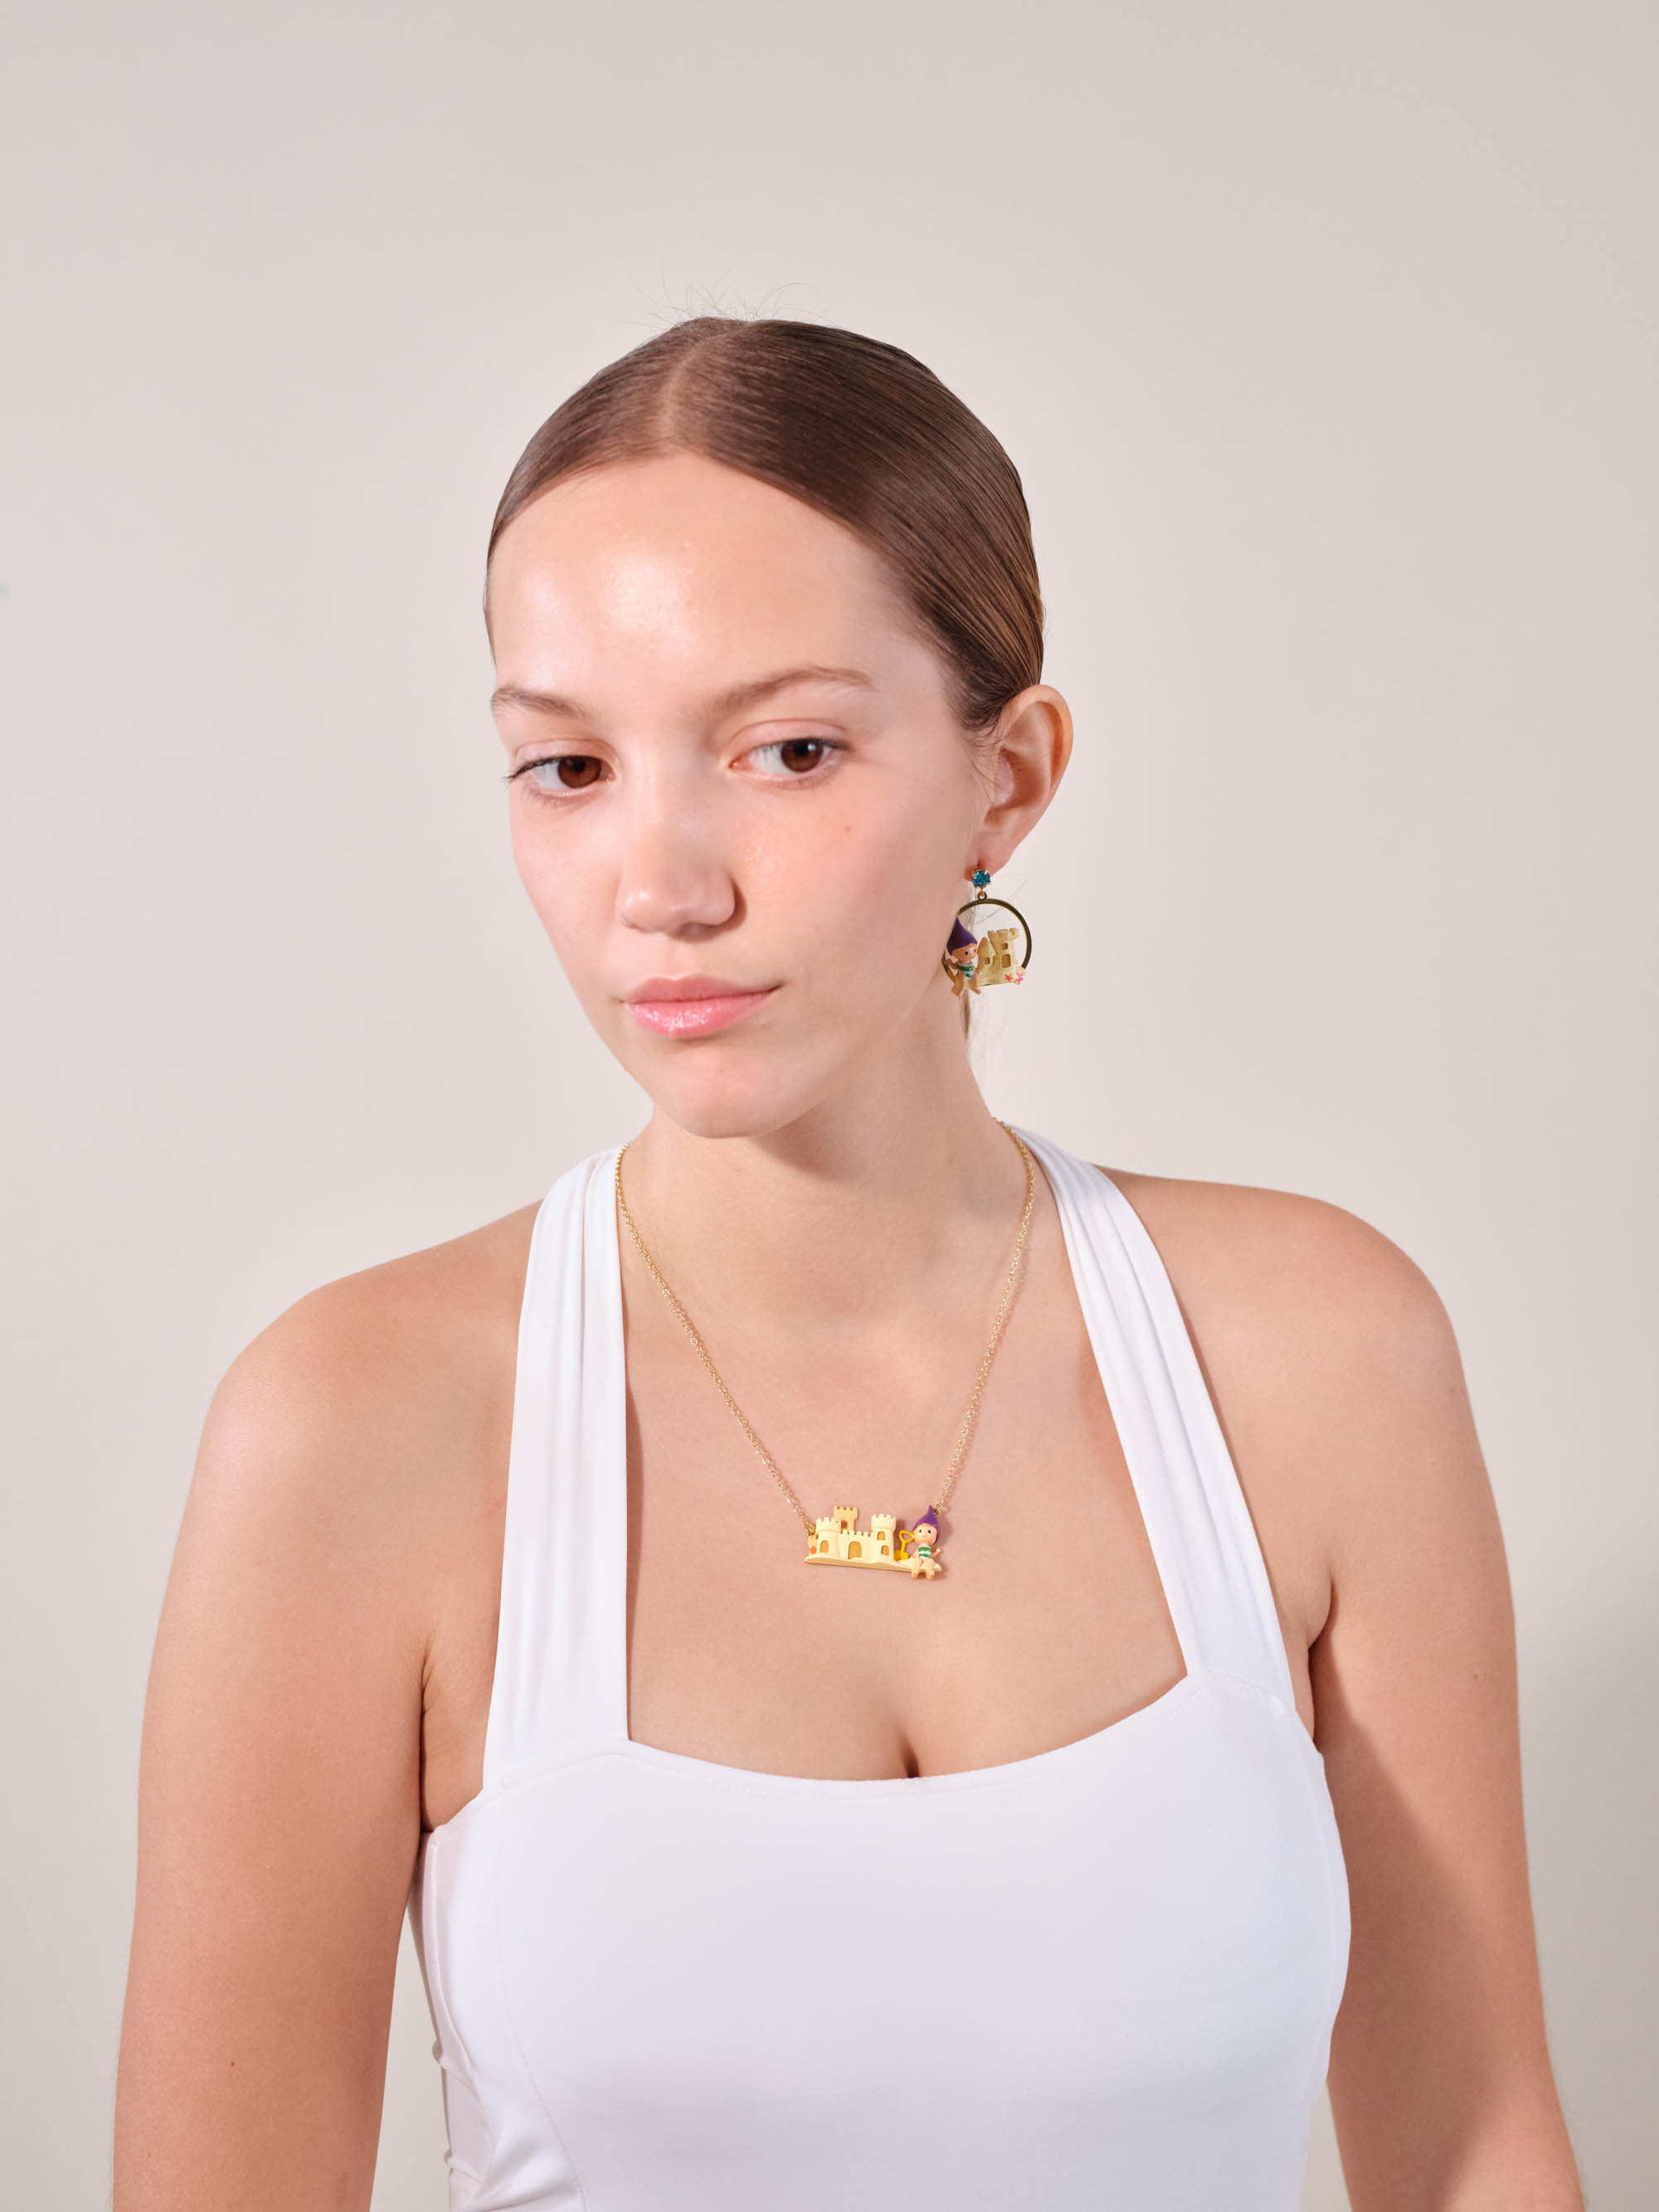 Little garden gnome and sandcastle statement necklace